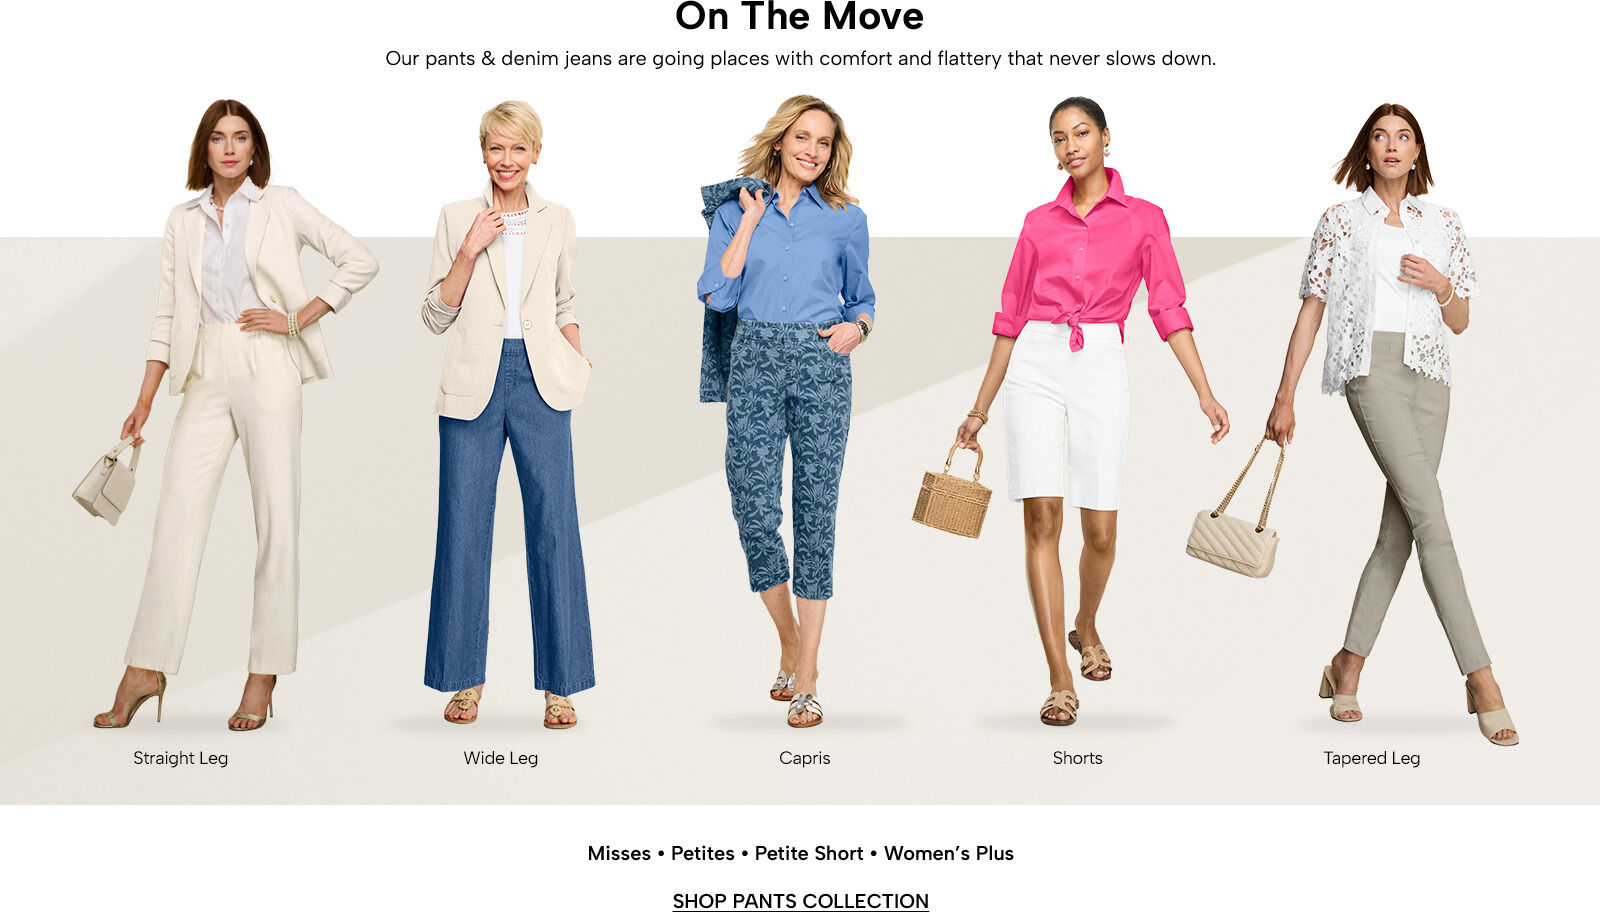 On the Move - our pants & denim jeans are going places with comfort and flattery that never slows down. Misses, Petites, Petite Short, & Women's Plus. Shop Pants Collection